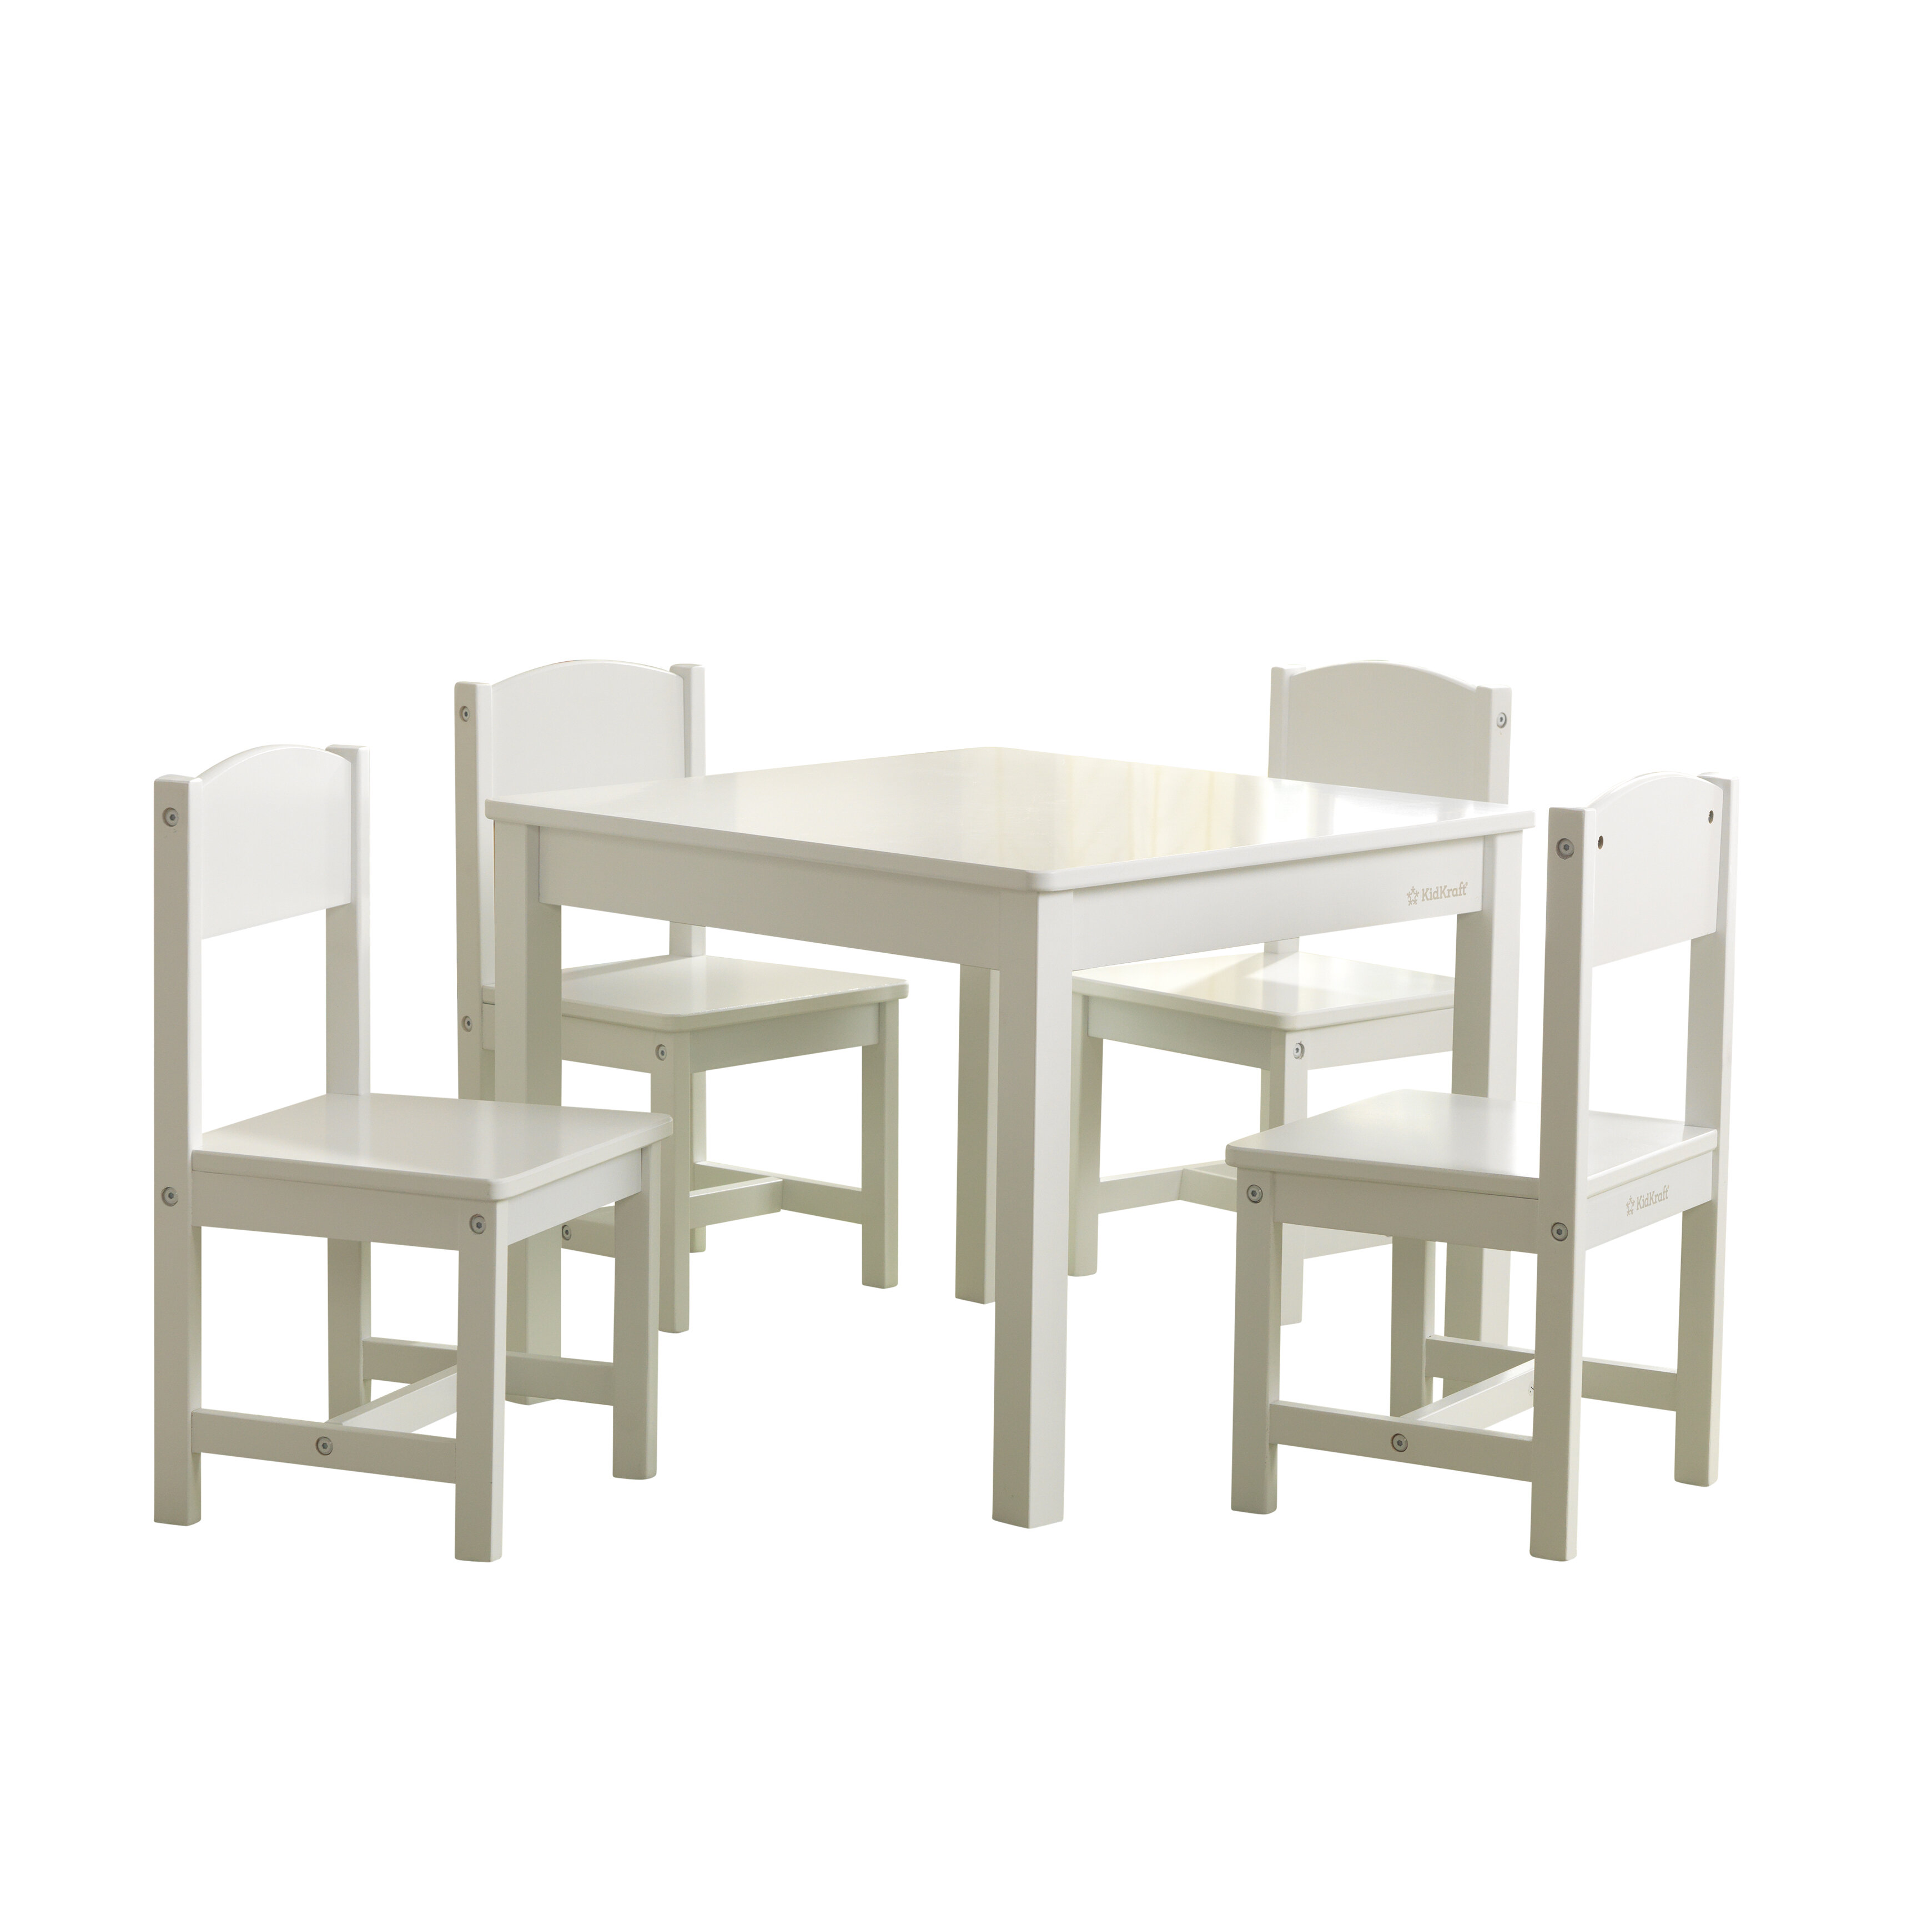 White Basics Kids Solid Wood Table and 2 Chairs Set 